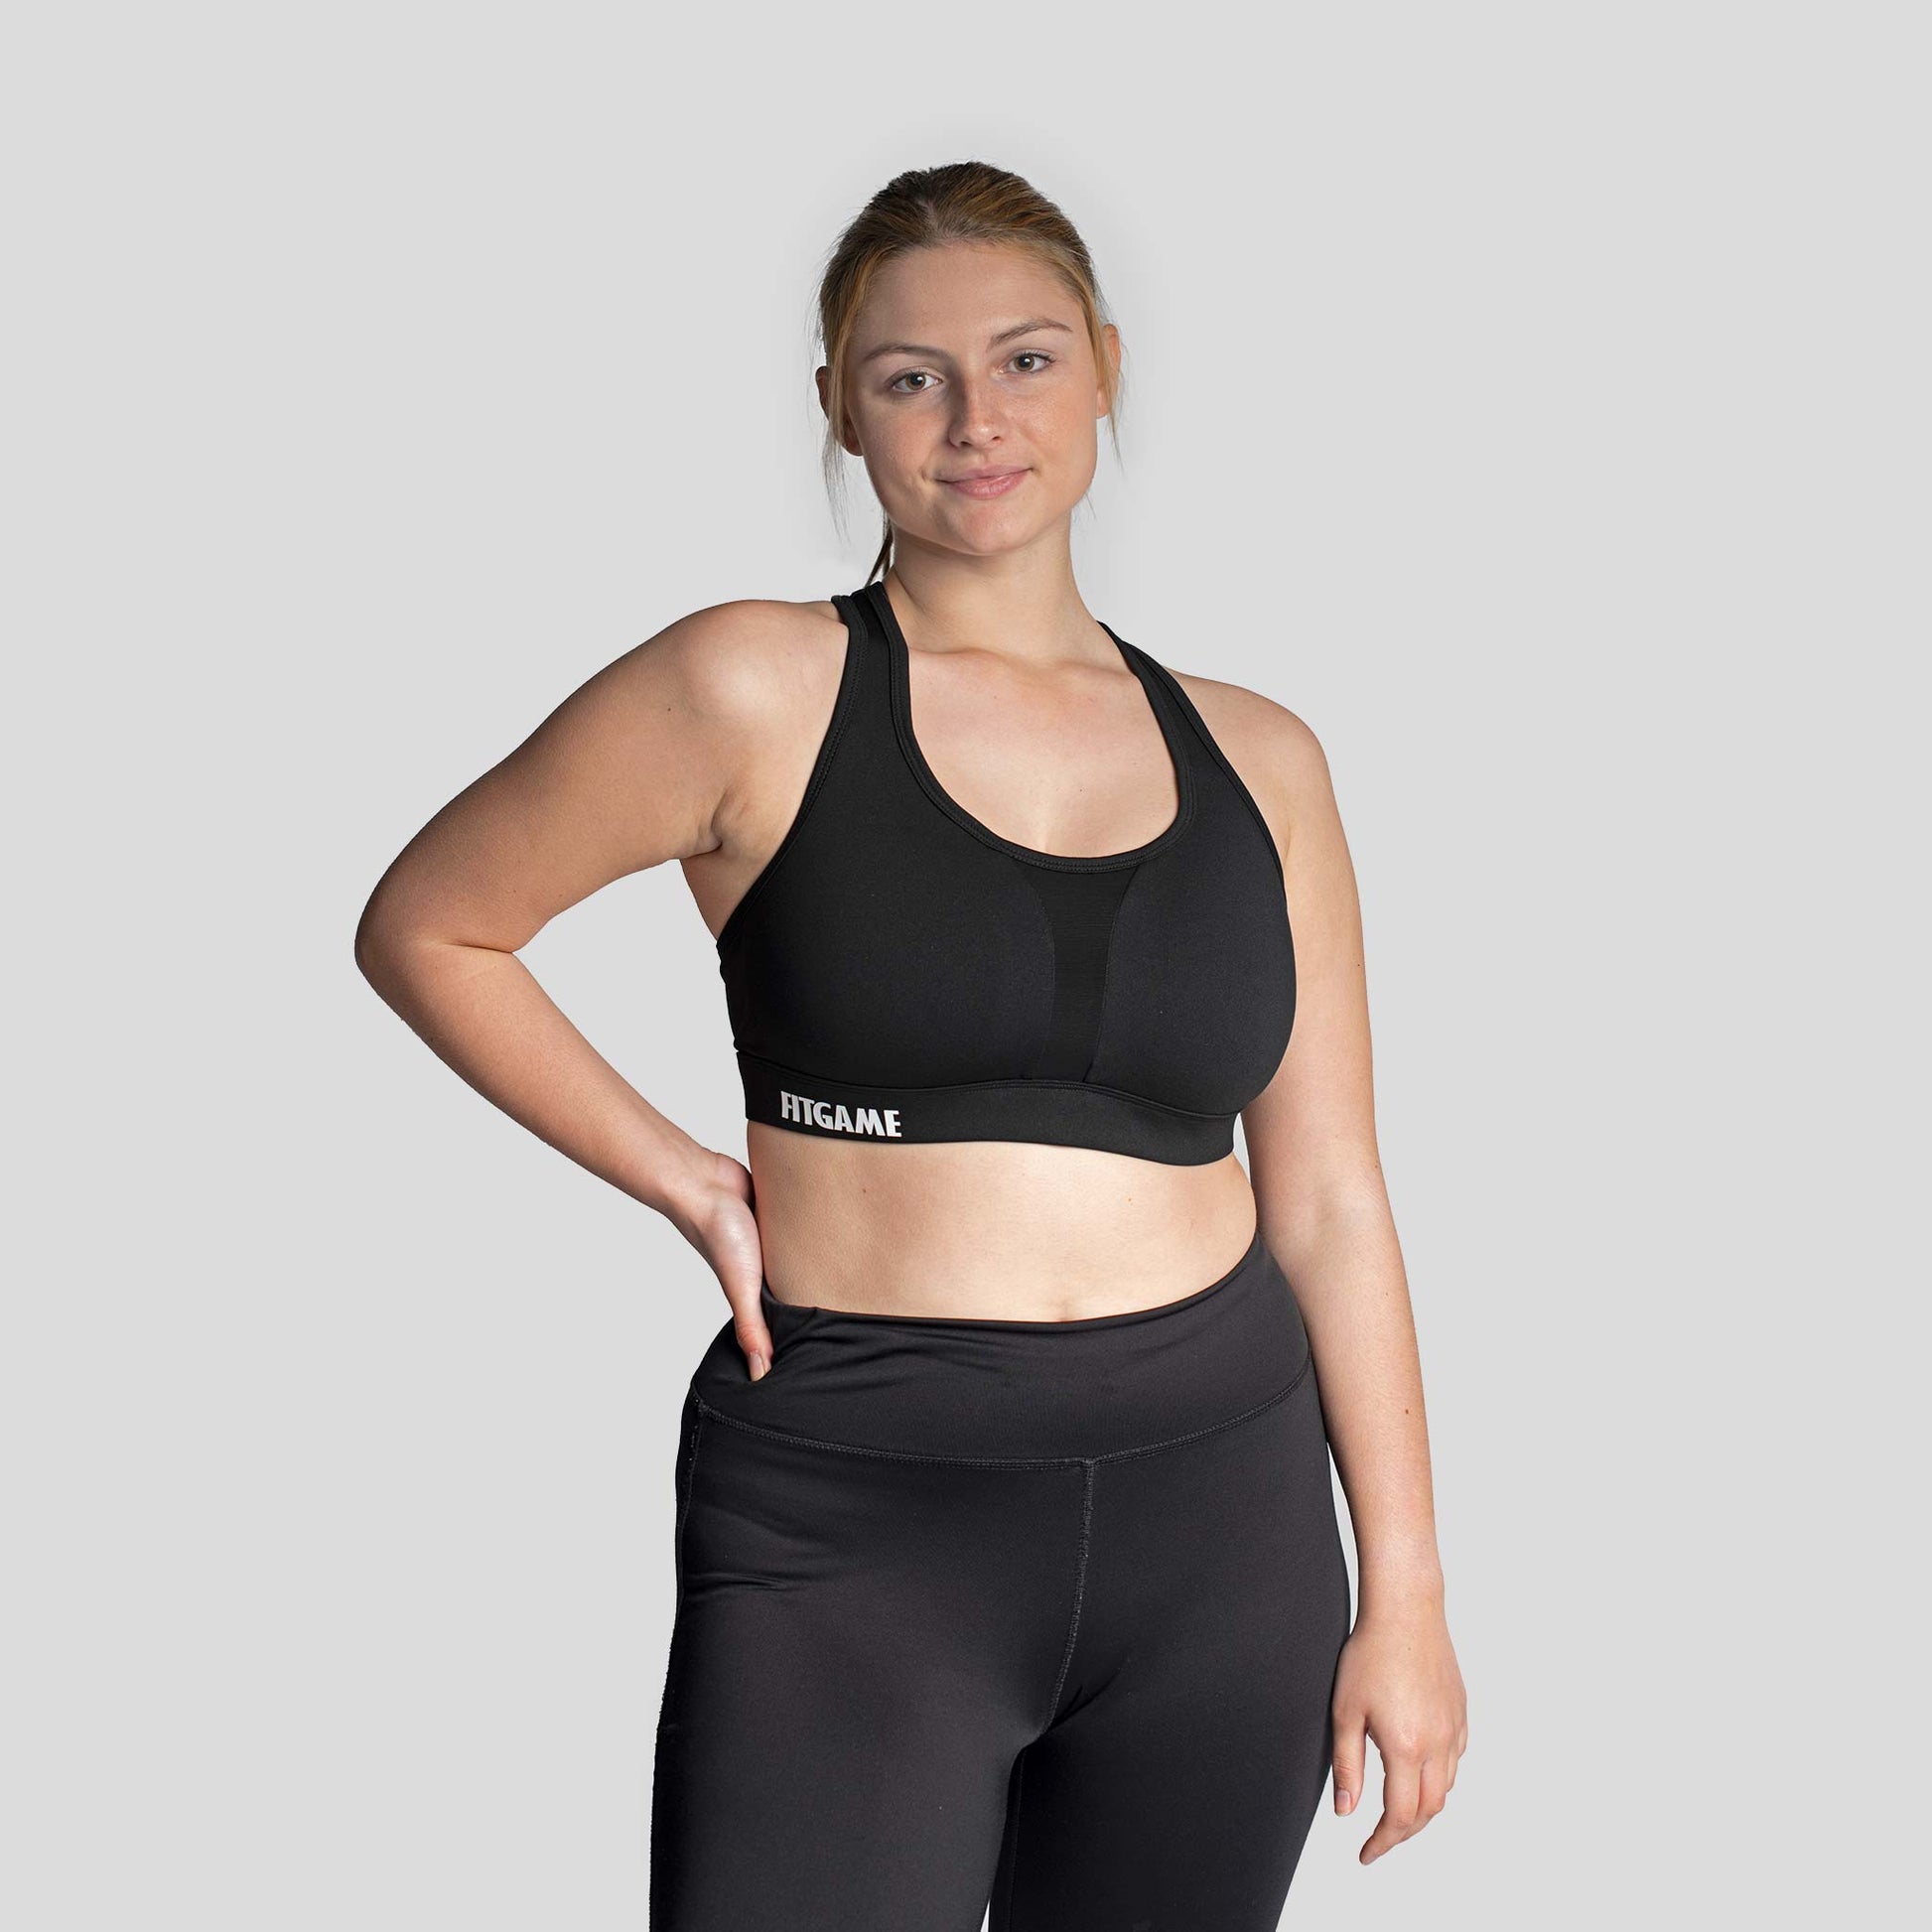 13 Sports Bras for Big Busts That Are Functional AND Fashionable